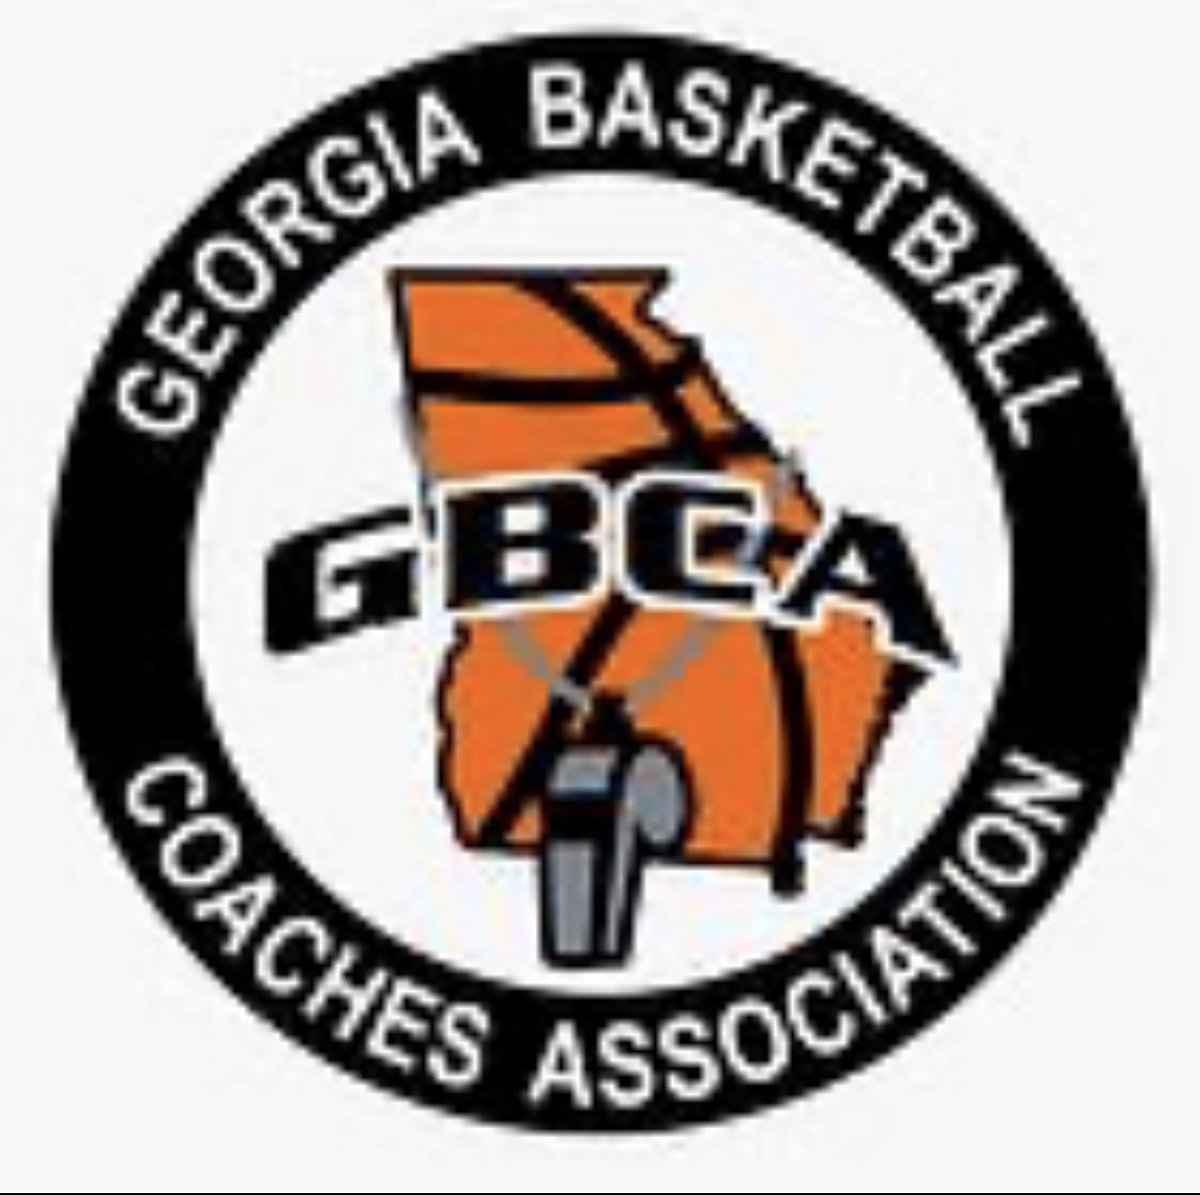 Men's Colleges Basketball Coaches: It is time to Register for our Live Period Events.
GBCA GA June 21-23 basketball.exposureevents.com/222691/e/colle…
GBCA SE Regional June 28-30 basketball.exposureevents.com/222690/e/colle…
$150 for 1st D1 Coach, $50 each extra D1 Coach
$150 for all NON-D1 Schools (includes entire staff).